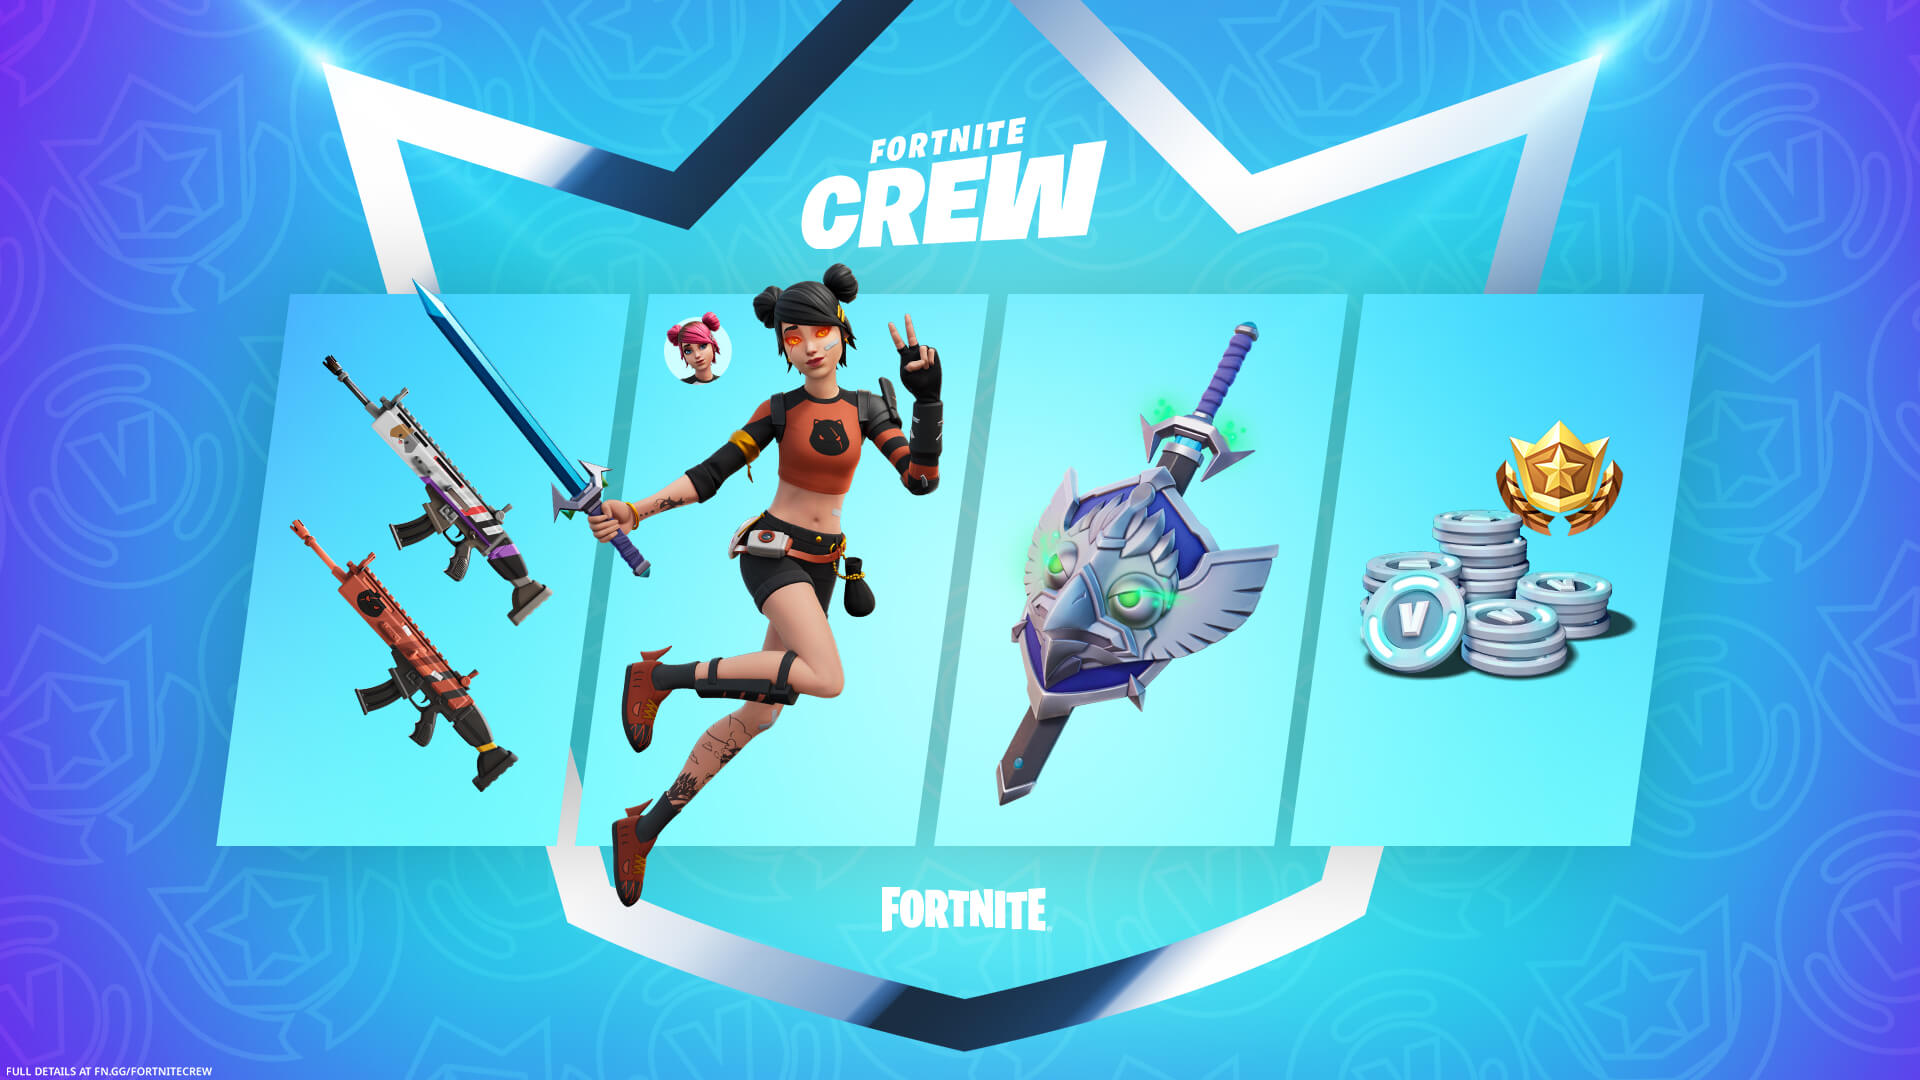 Fortnite Crew August - Summer Skye outfit  